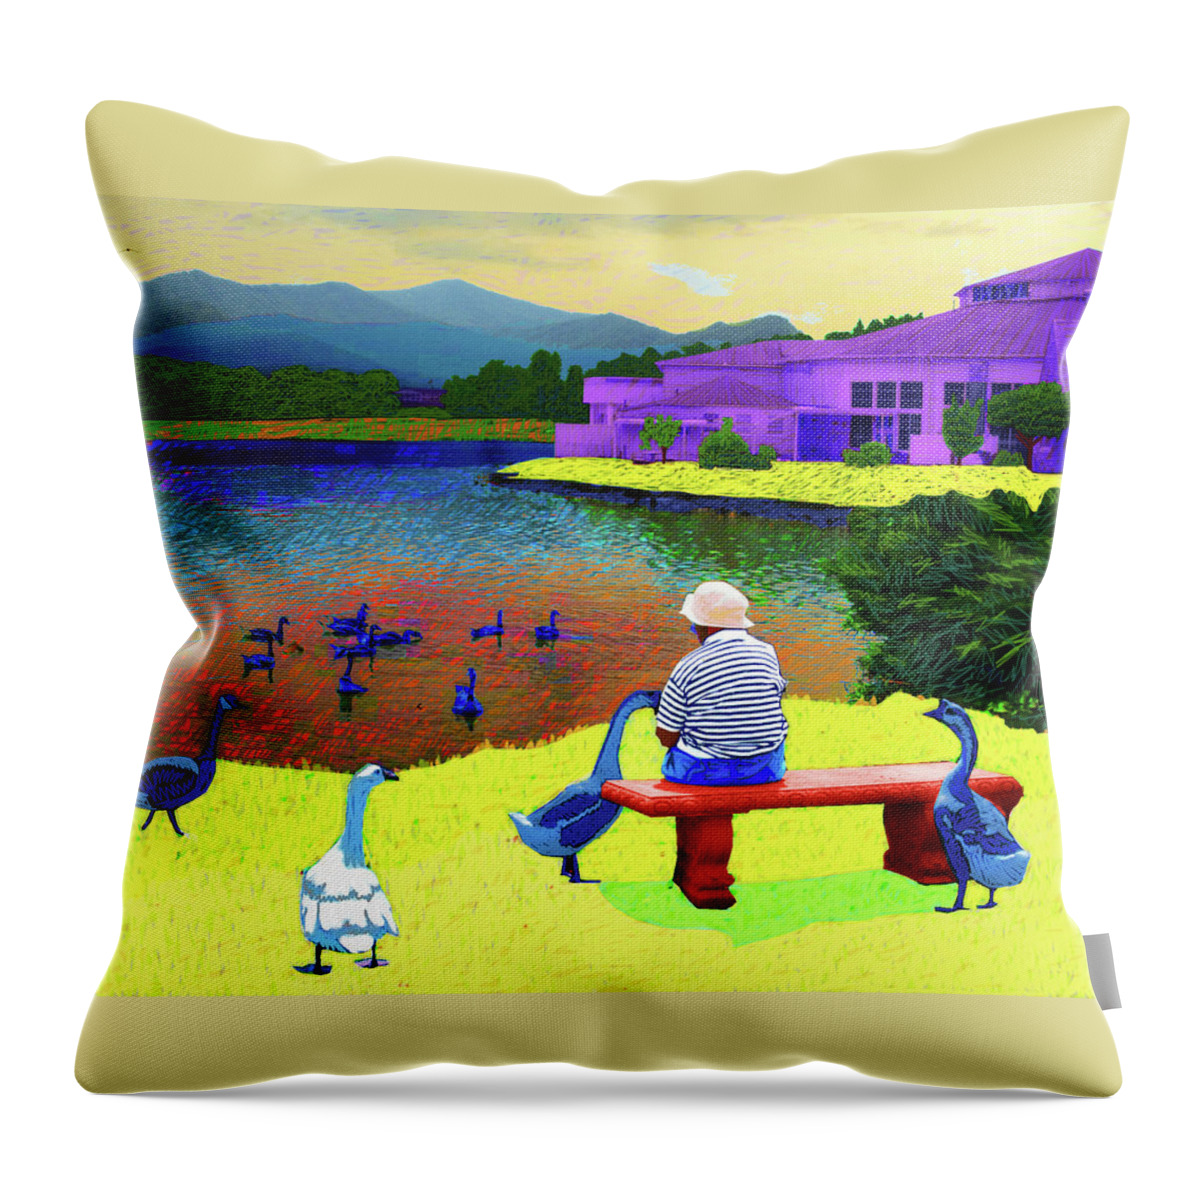 Lake Throw Pillow featuring the digital art Lake Junaluska Geese by Rod Whyte